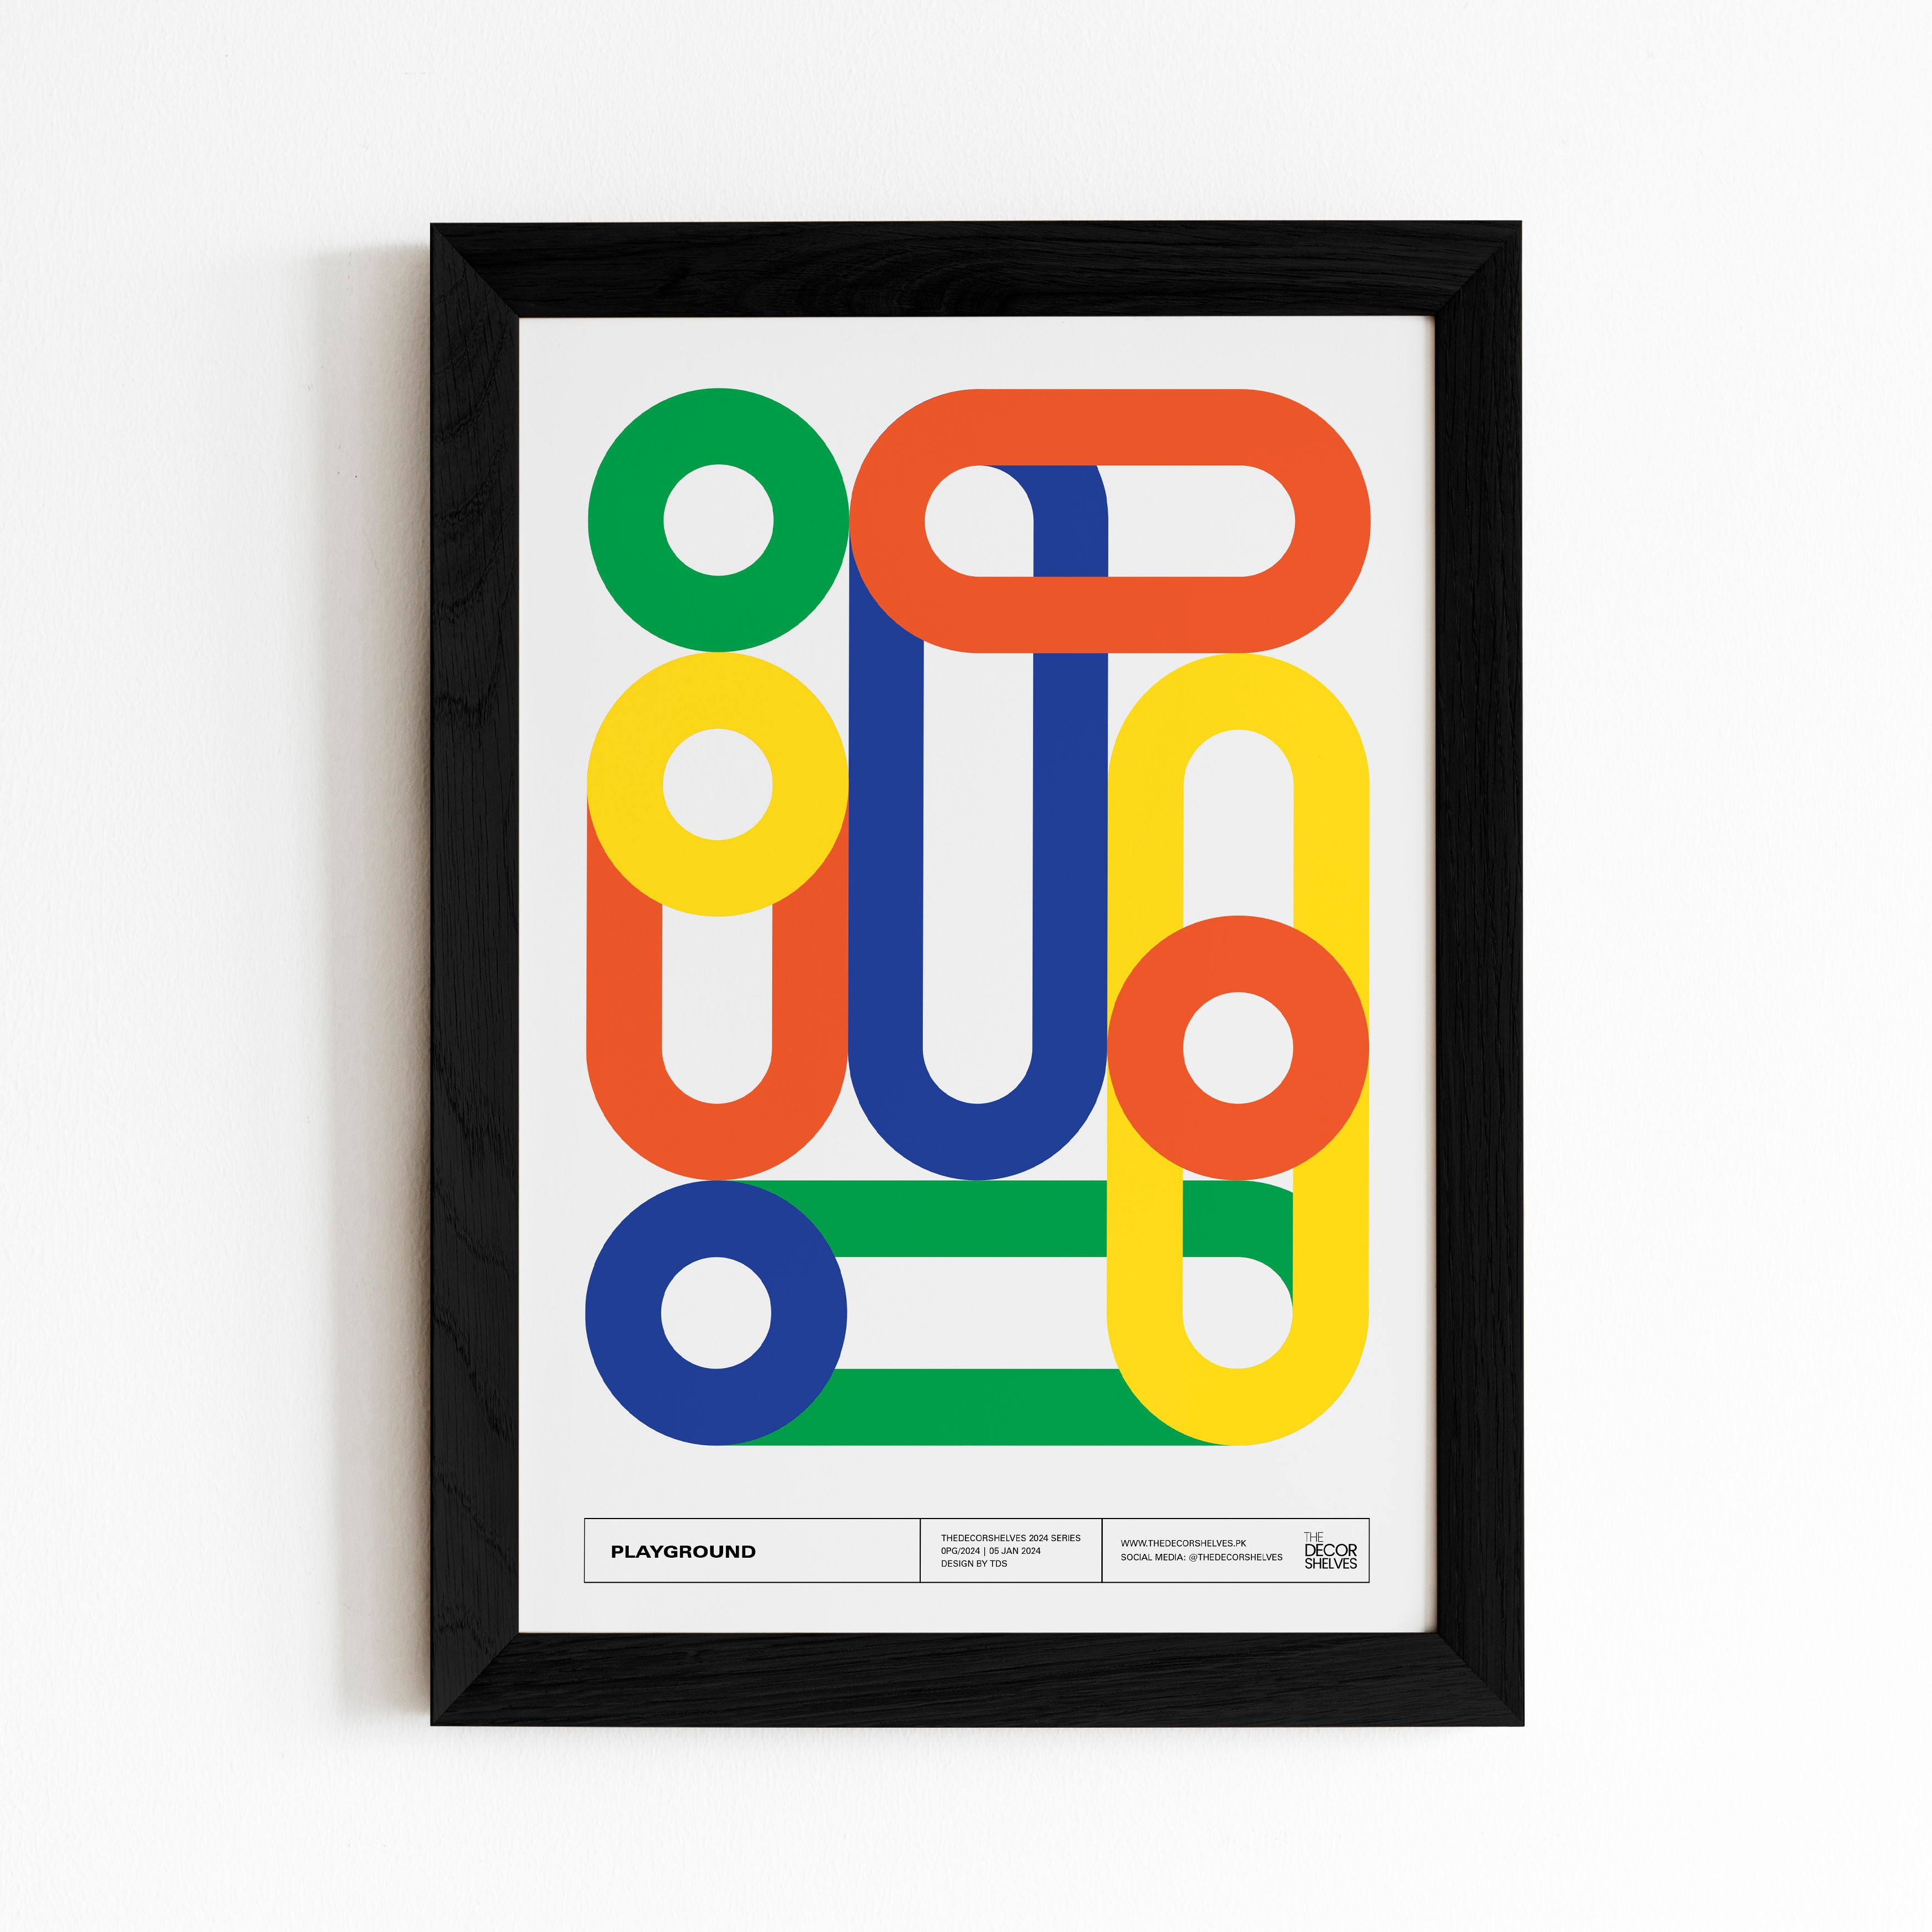 playground, wall frames, poster design, black frame, wall art, abstract art, frames, the decor shelves, home decor, room decor, decor ideas, black and white, geometrical, brown frame, 2024 poster, circles, Colour full poster, trending posters, digital art, shapes, multi colours, multi colors, yellow, orange, green, blue